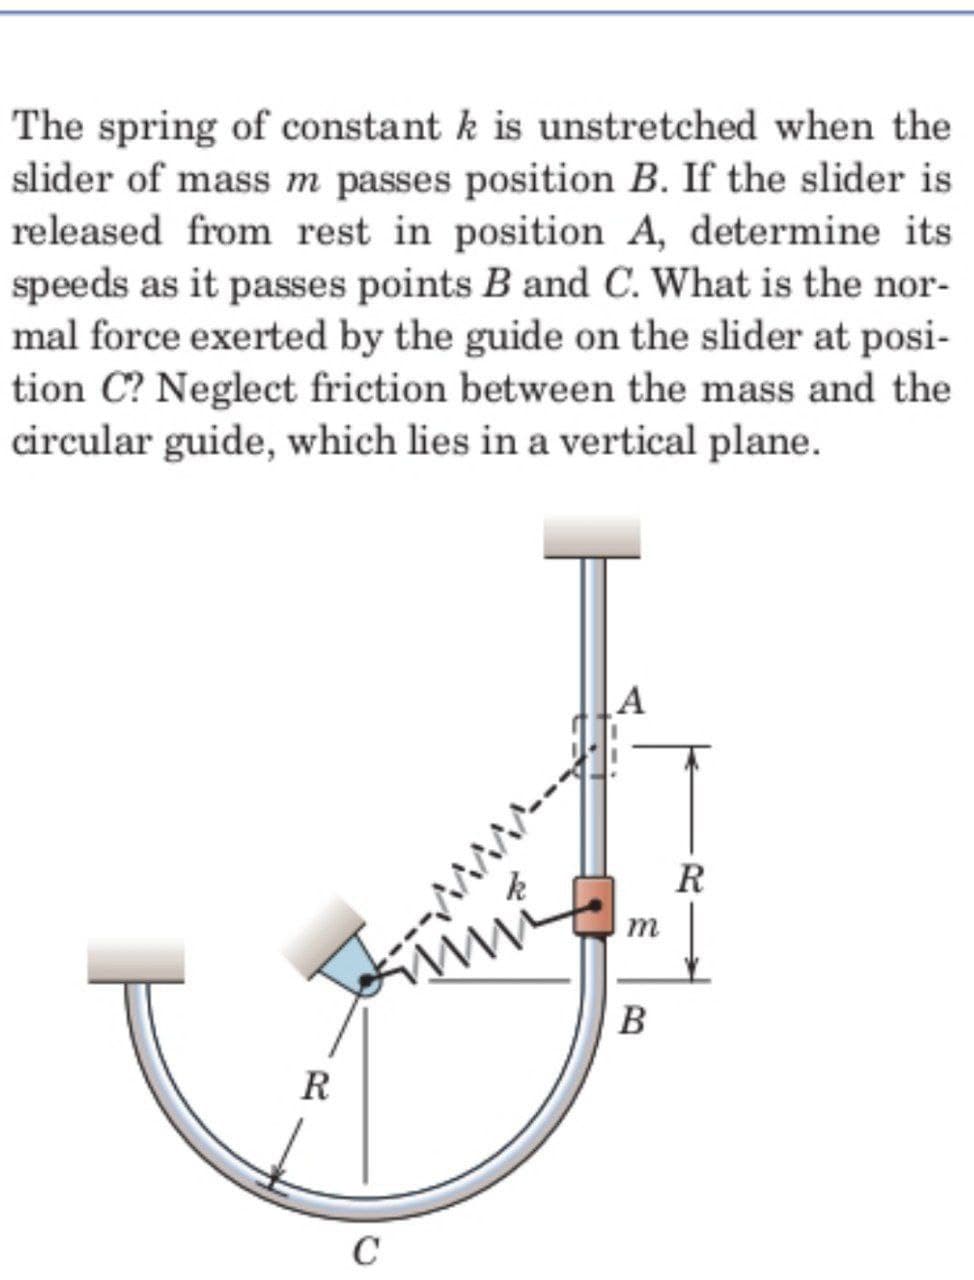 The spring of constant k is unstretched when the
slider of mass m passes position B. If the slider is
released from rest in position A, determine its
speeds as it passes points B and C. What is the nor-
mal force exerted by the guide on the slider at posi-
tion C? Neglect friction between the mass and the
circular guide, which lies in a vertical plane.
R
ww
R
C
m
B